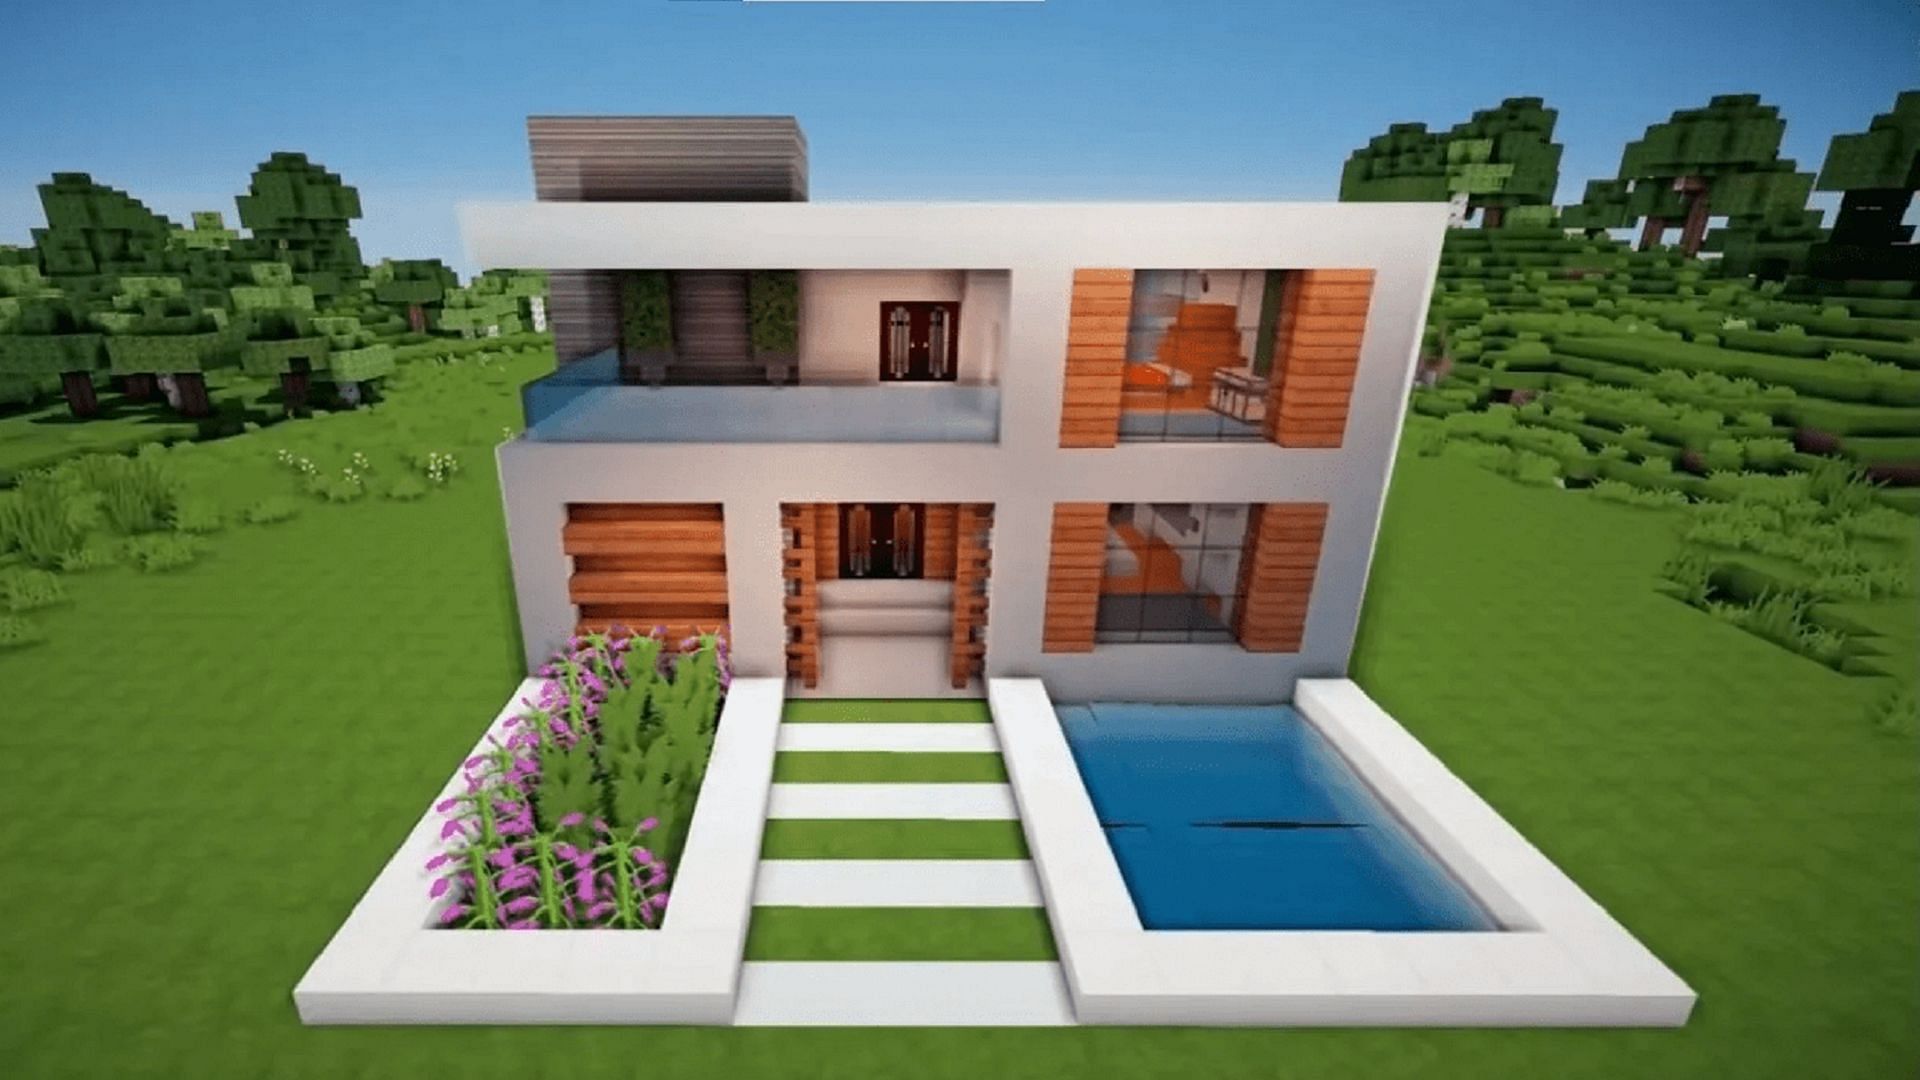 A small modern home in Minecraft (Image via Mojang)